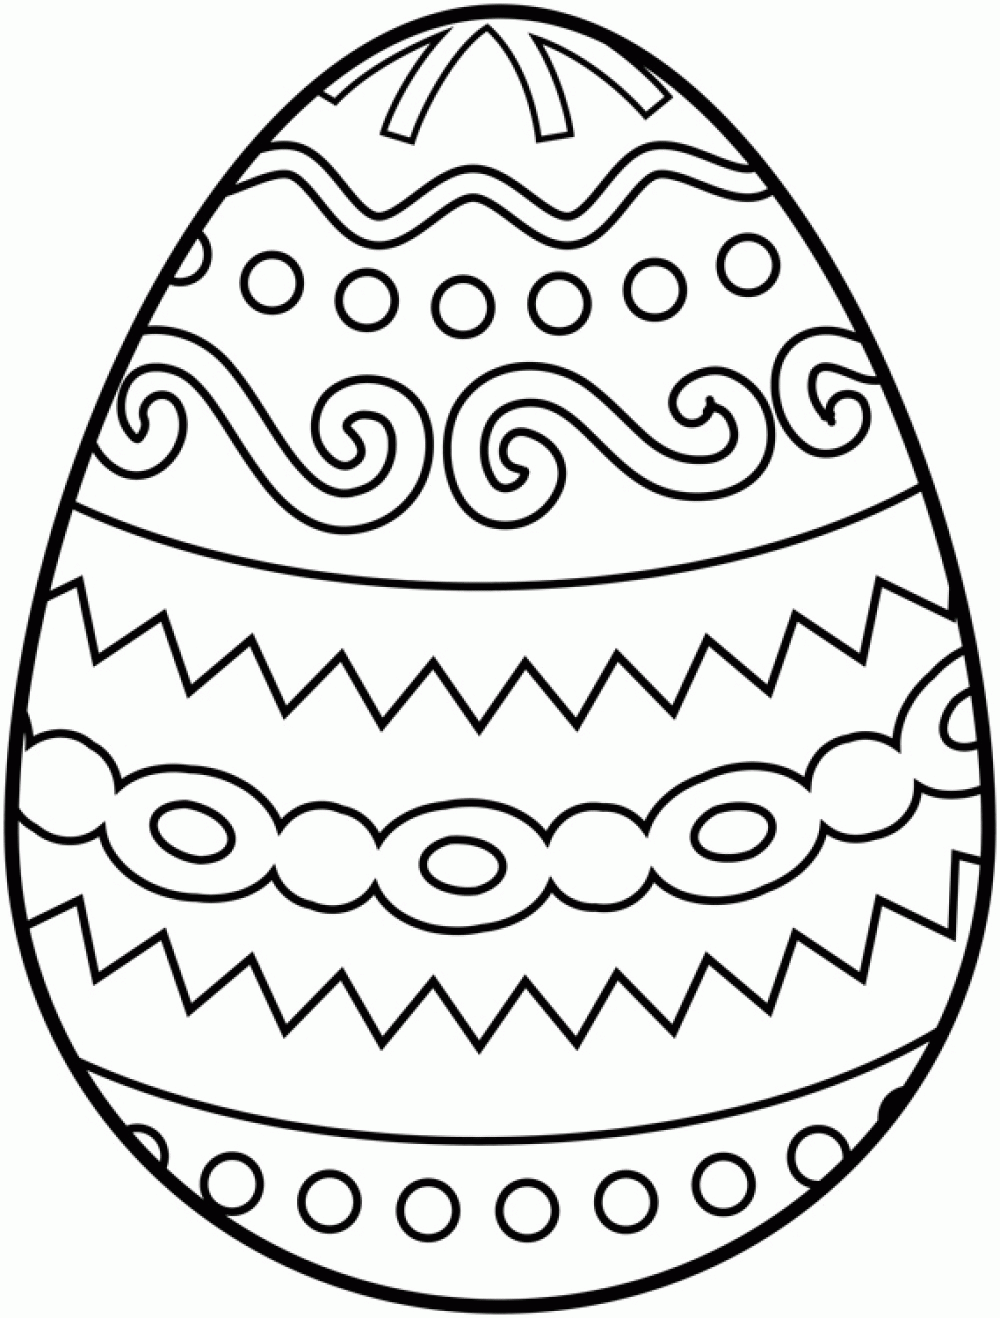 Easter Coloring Pages   Only Coloring Pages   Coloring Home